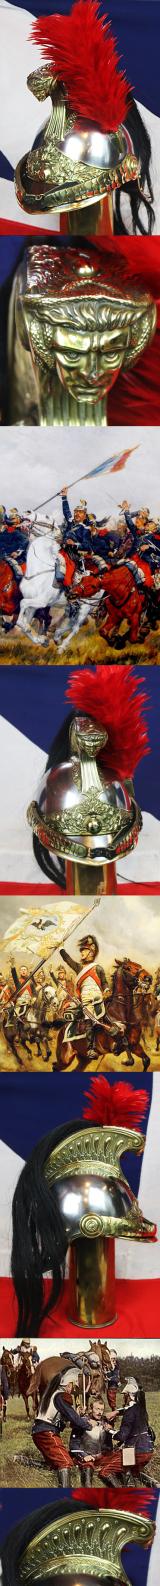 A Magnificent Antique, Original, French Dragoon Helmet 1872. Possibly The Best Example You May Ever See